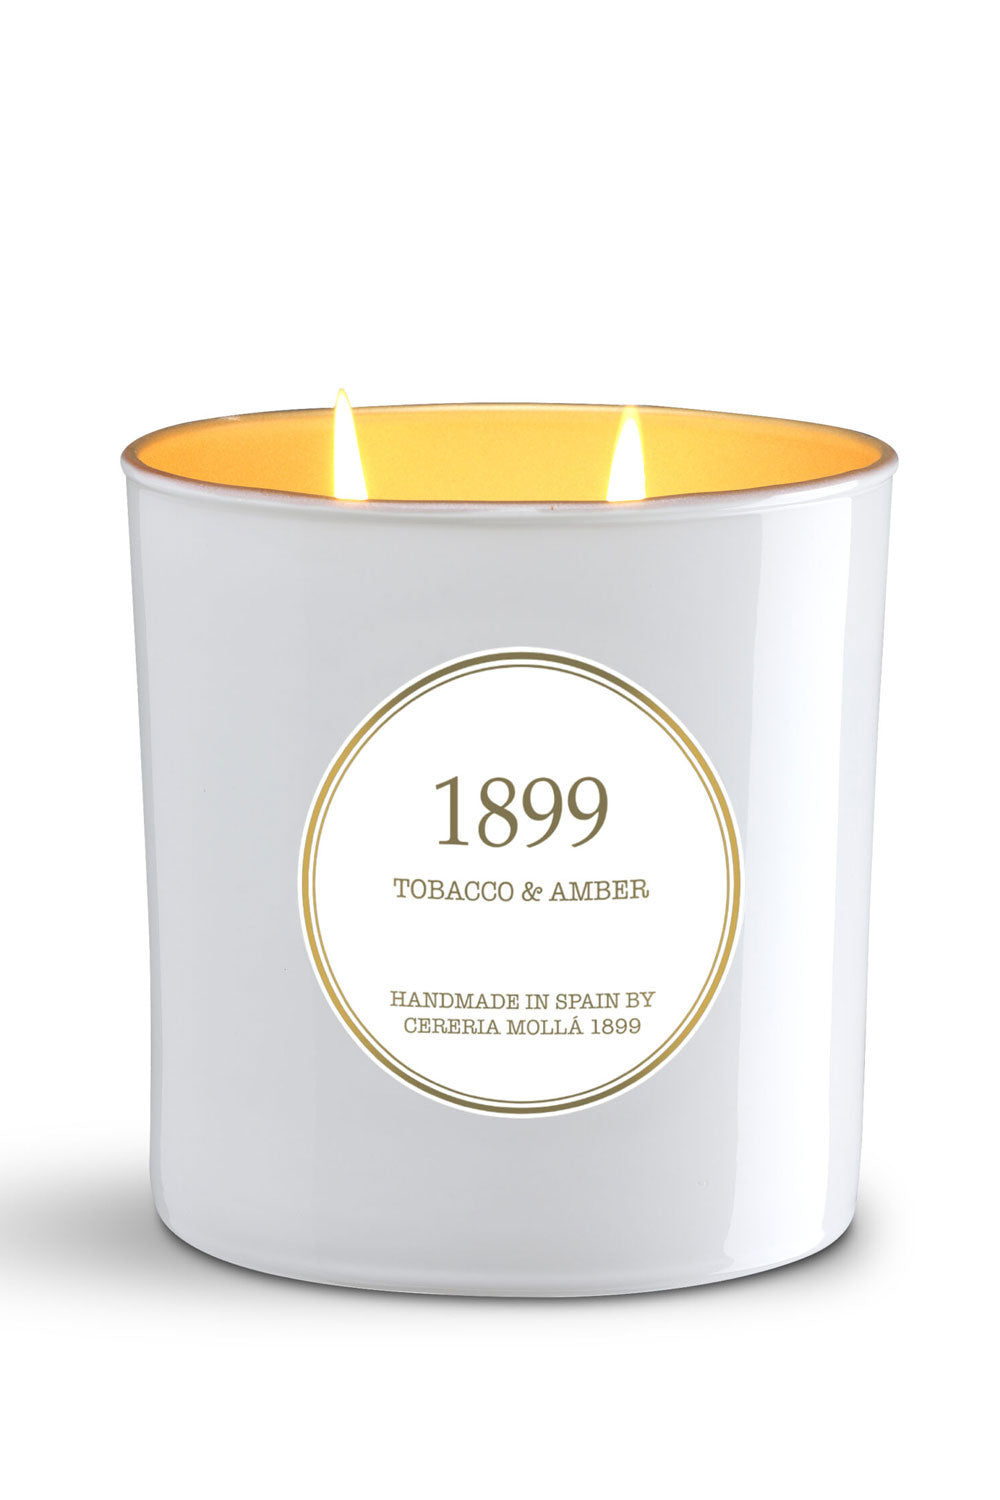 Tobacco & Amber 2 Wick XL Candle, 700g